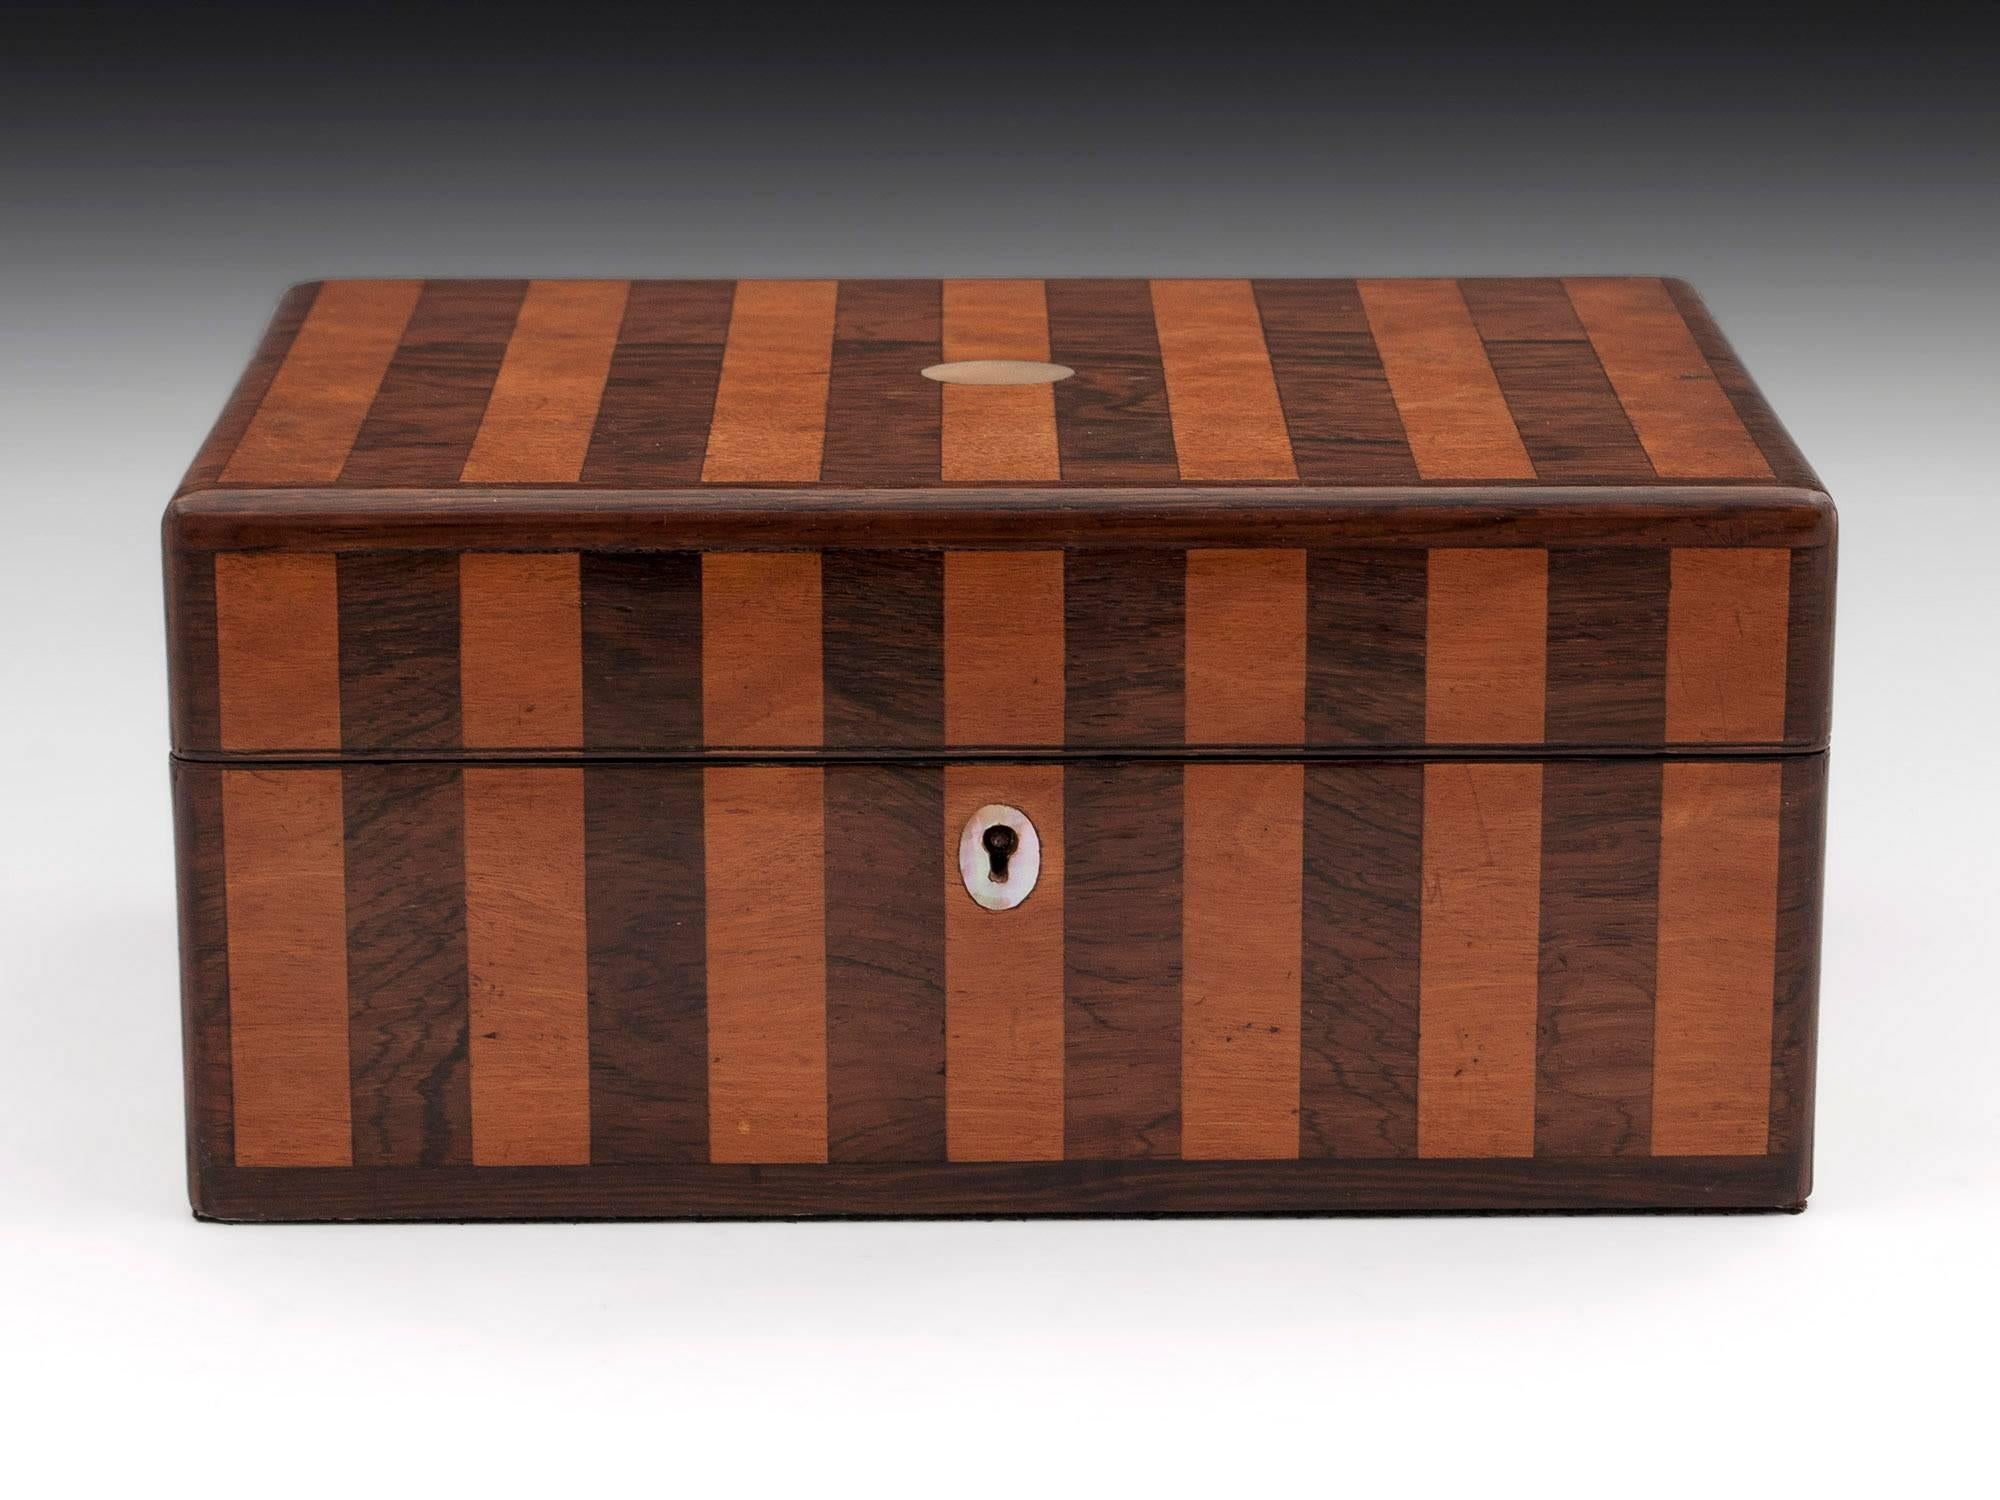 Antique jewellery box veneered in mahogany and satinwood stripes running from top to front of the box with mother-of-pearl escutcheons.

The interior is lined in navy blue paper with cushioned blue velvet.

This antique box comes with a fully